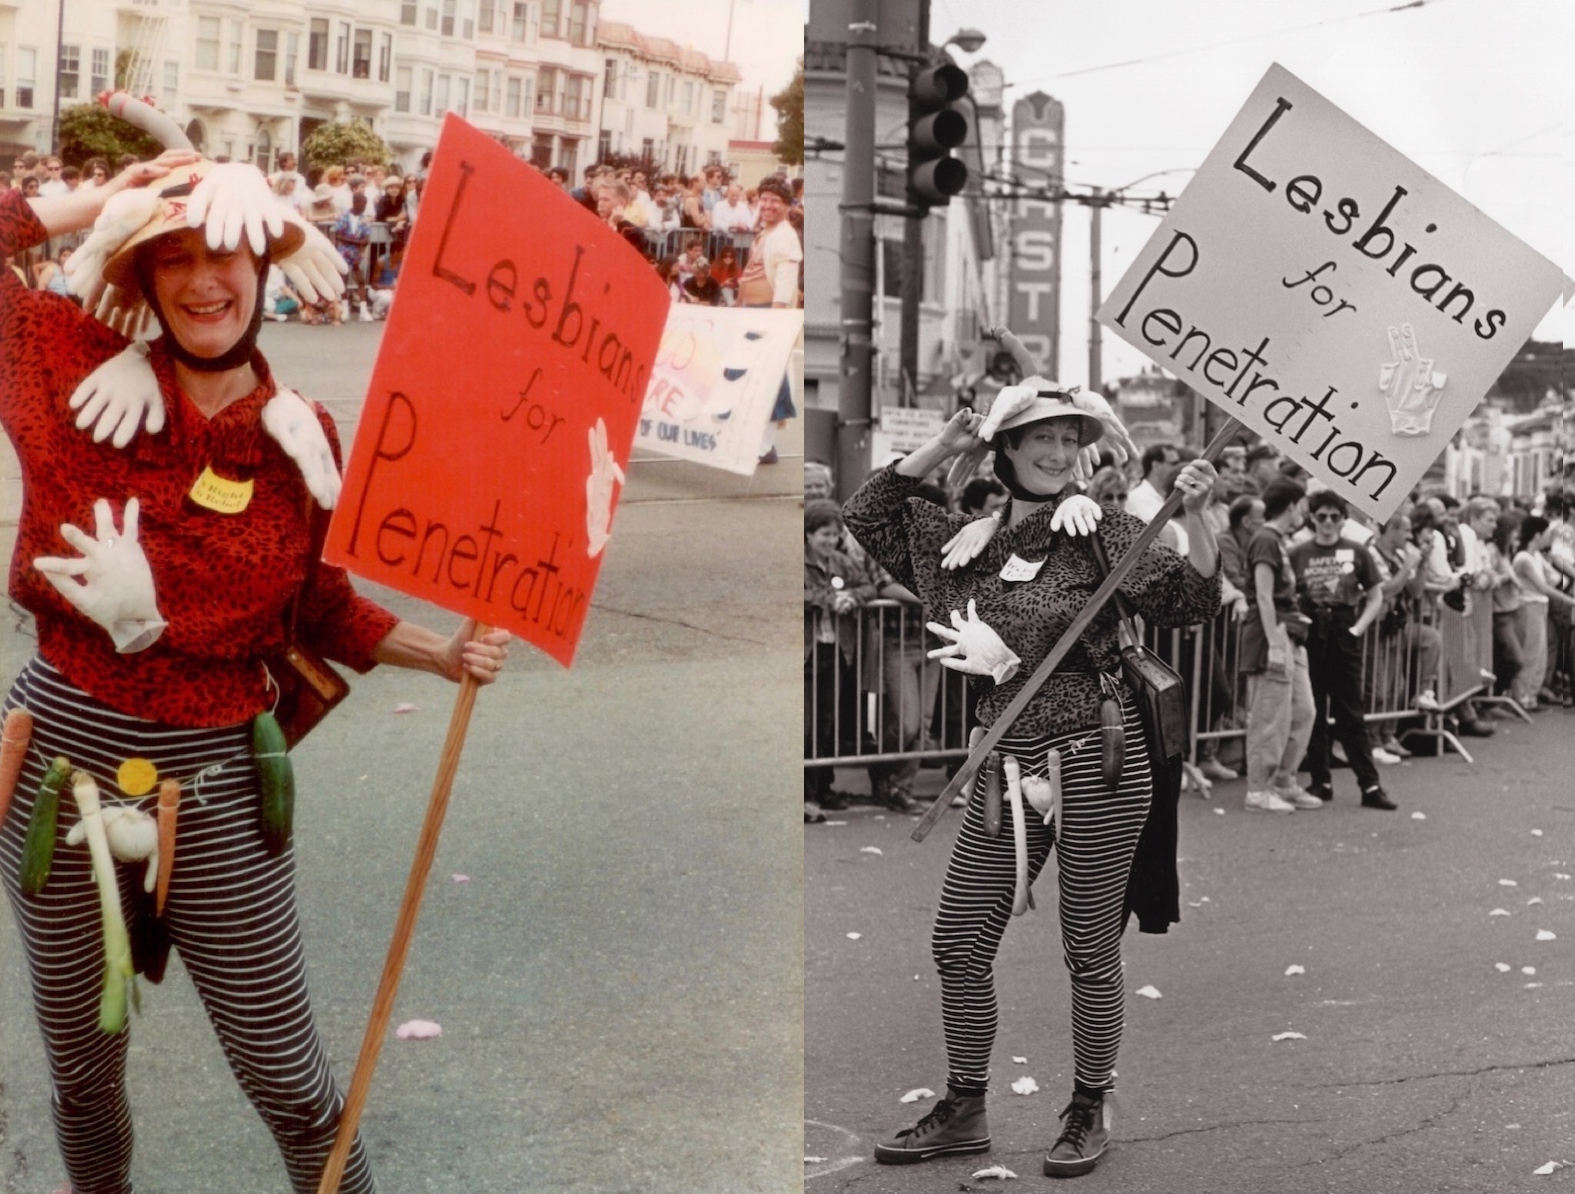 Terry at the San Francisco Gay Pride Parade, 1989. “I was a one-woman contingent.  No one would march with me.” Photo credits by John Camp and Bonnie Daley. Photos courtesy of Terry Baum.